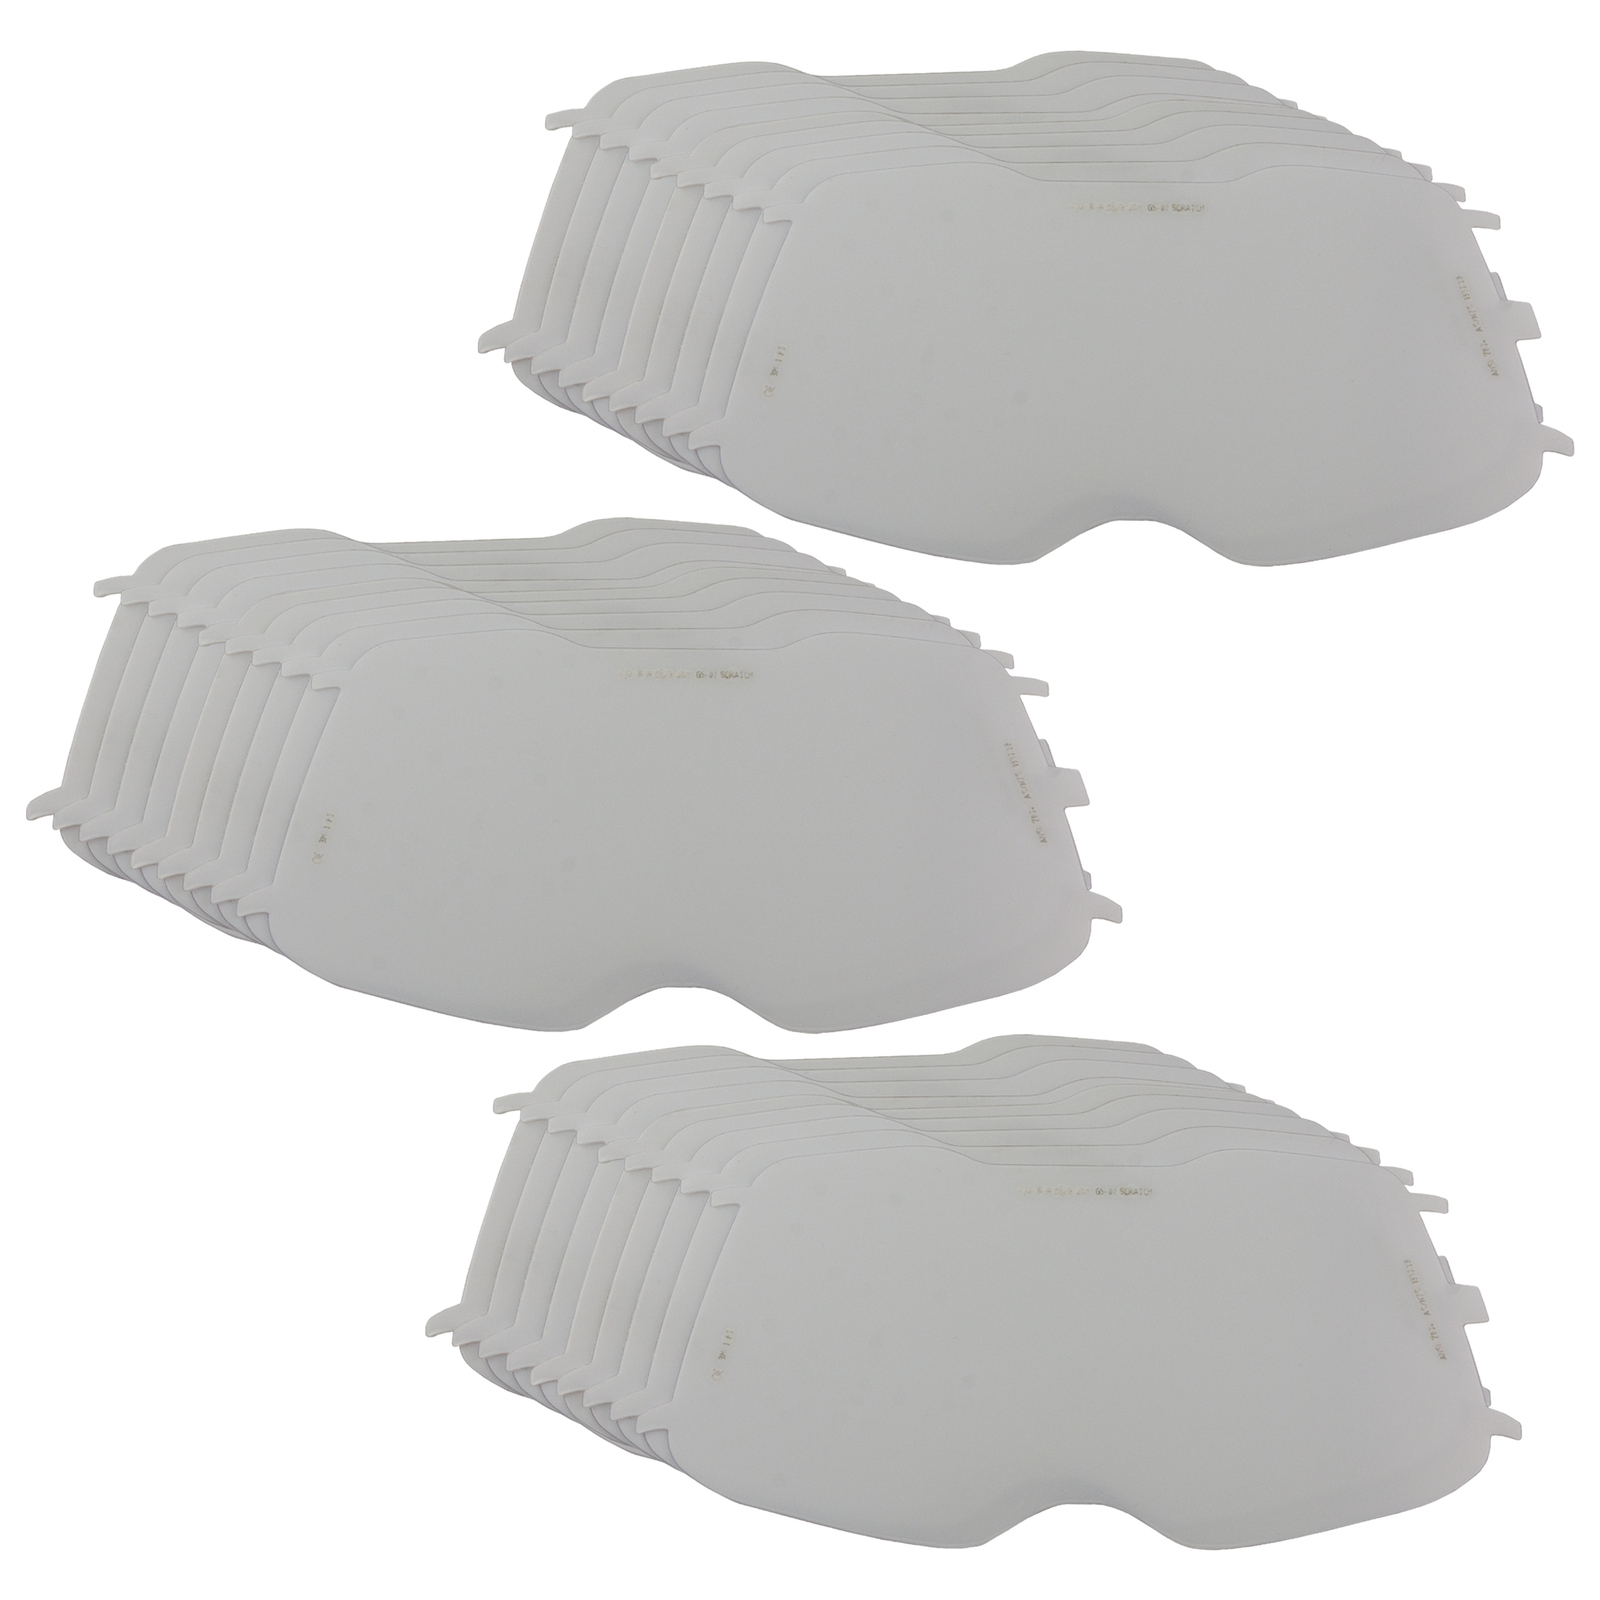 3M Speedglas G5-02 Hard-Coated Outer Cover Lens - 50 Pack